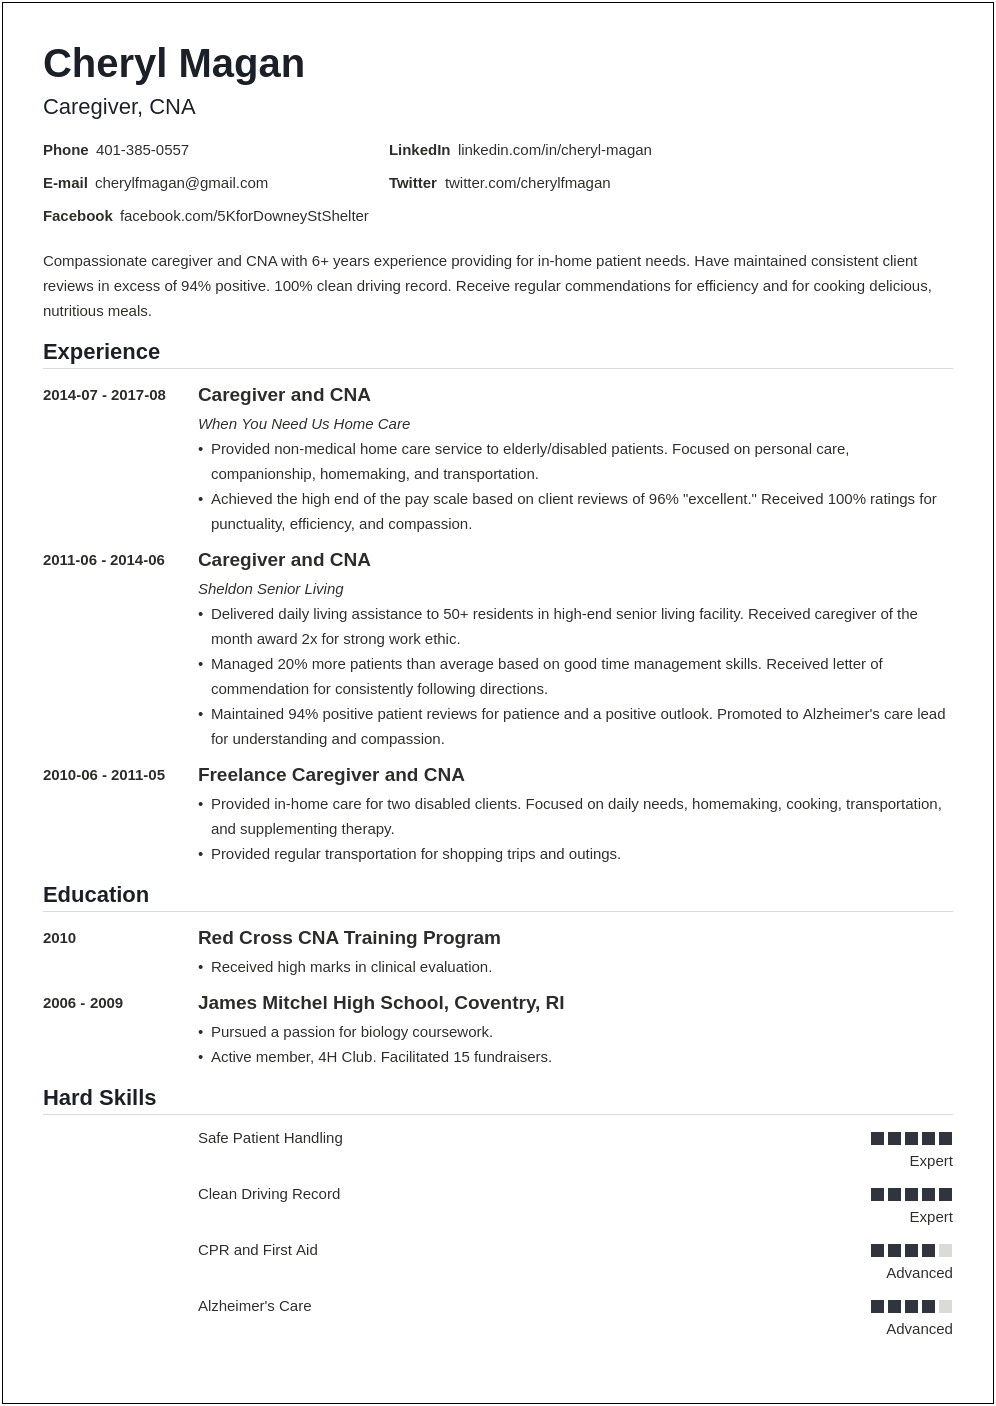 Example Resume For Caregiver Position